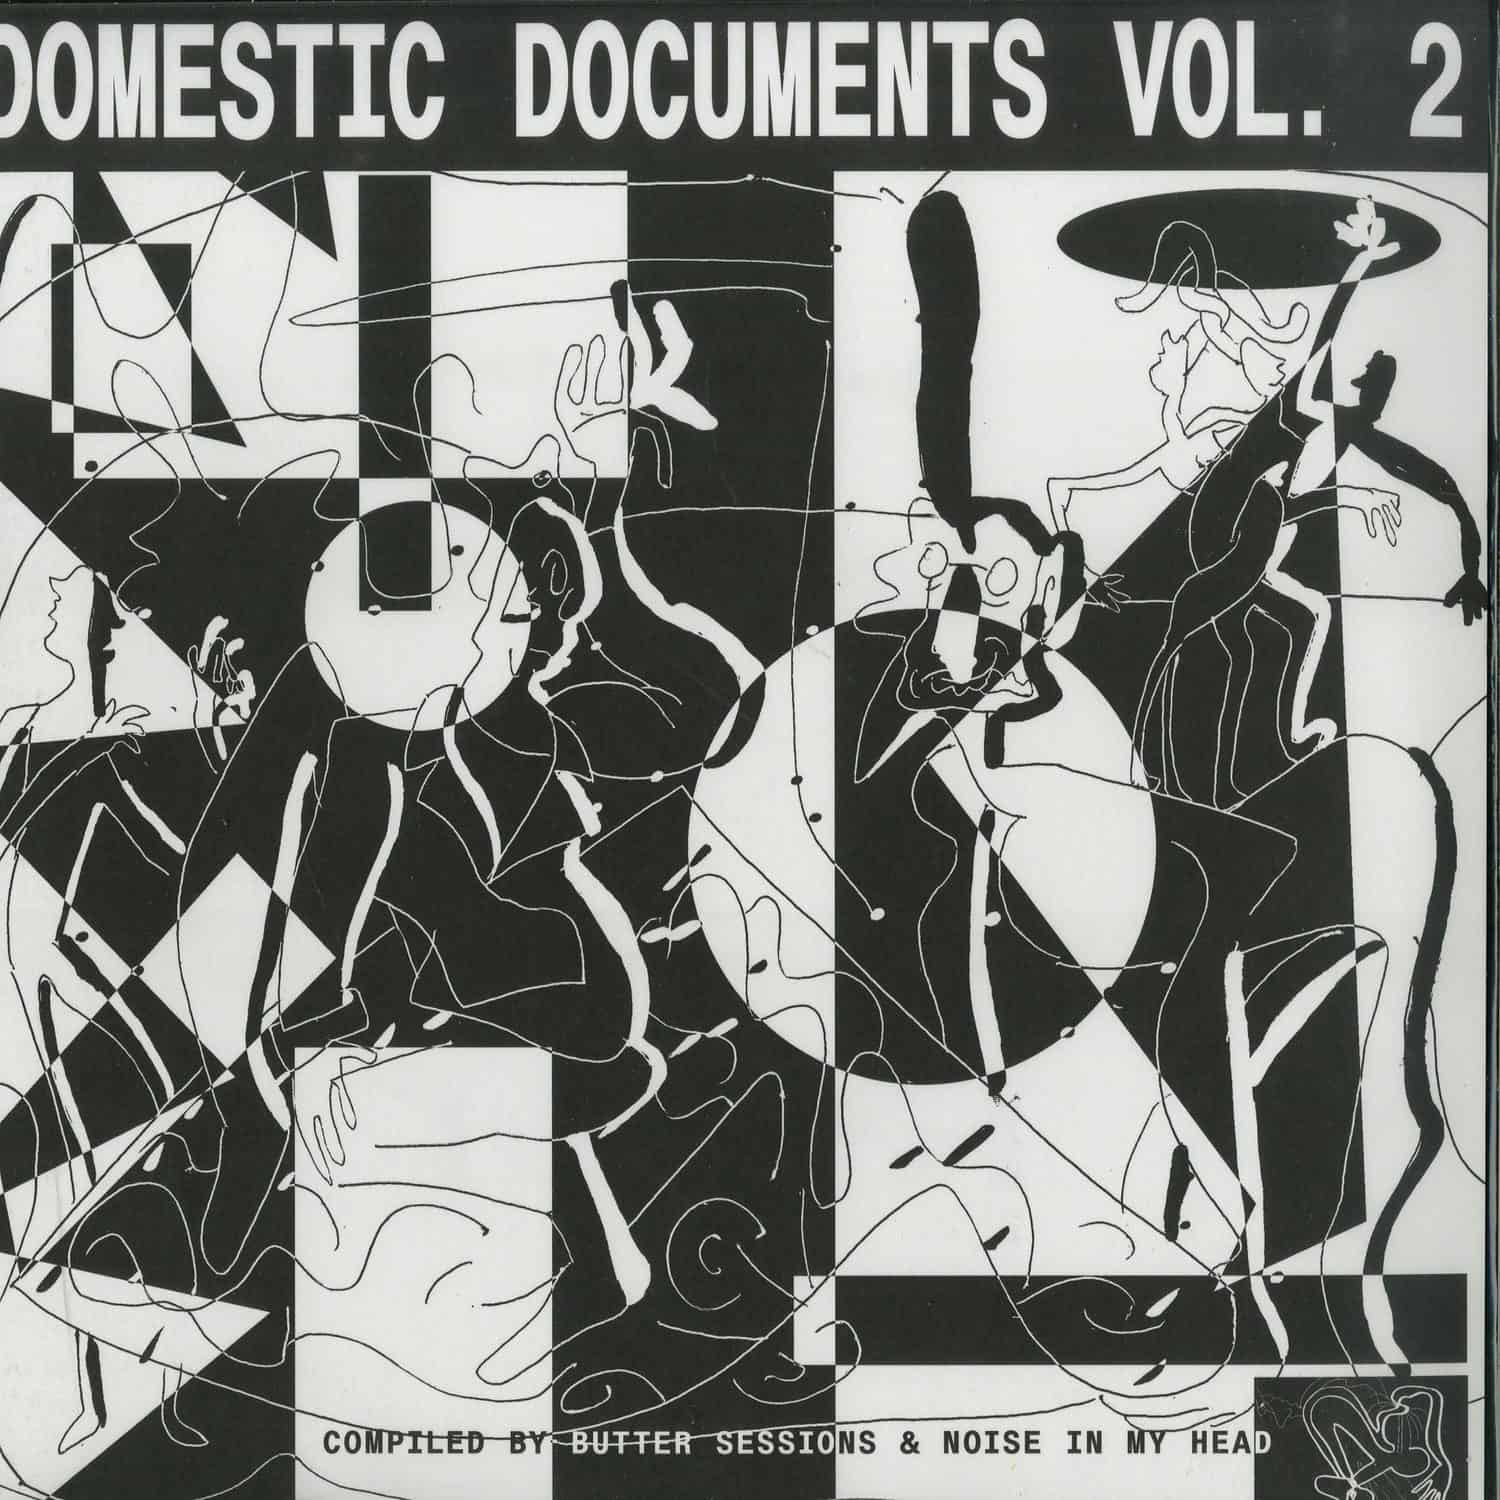 Various Artists - DOMESTIC DOCUMENTS VOLUME 2 